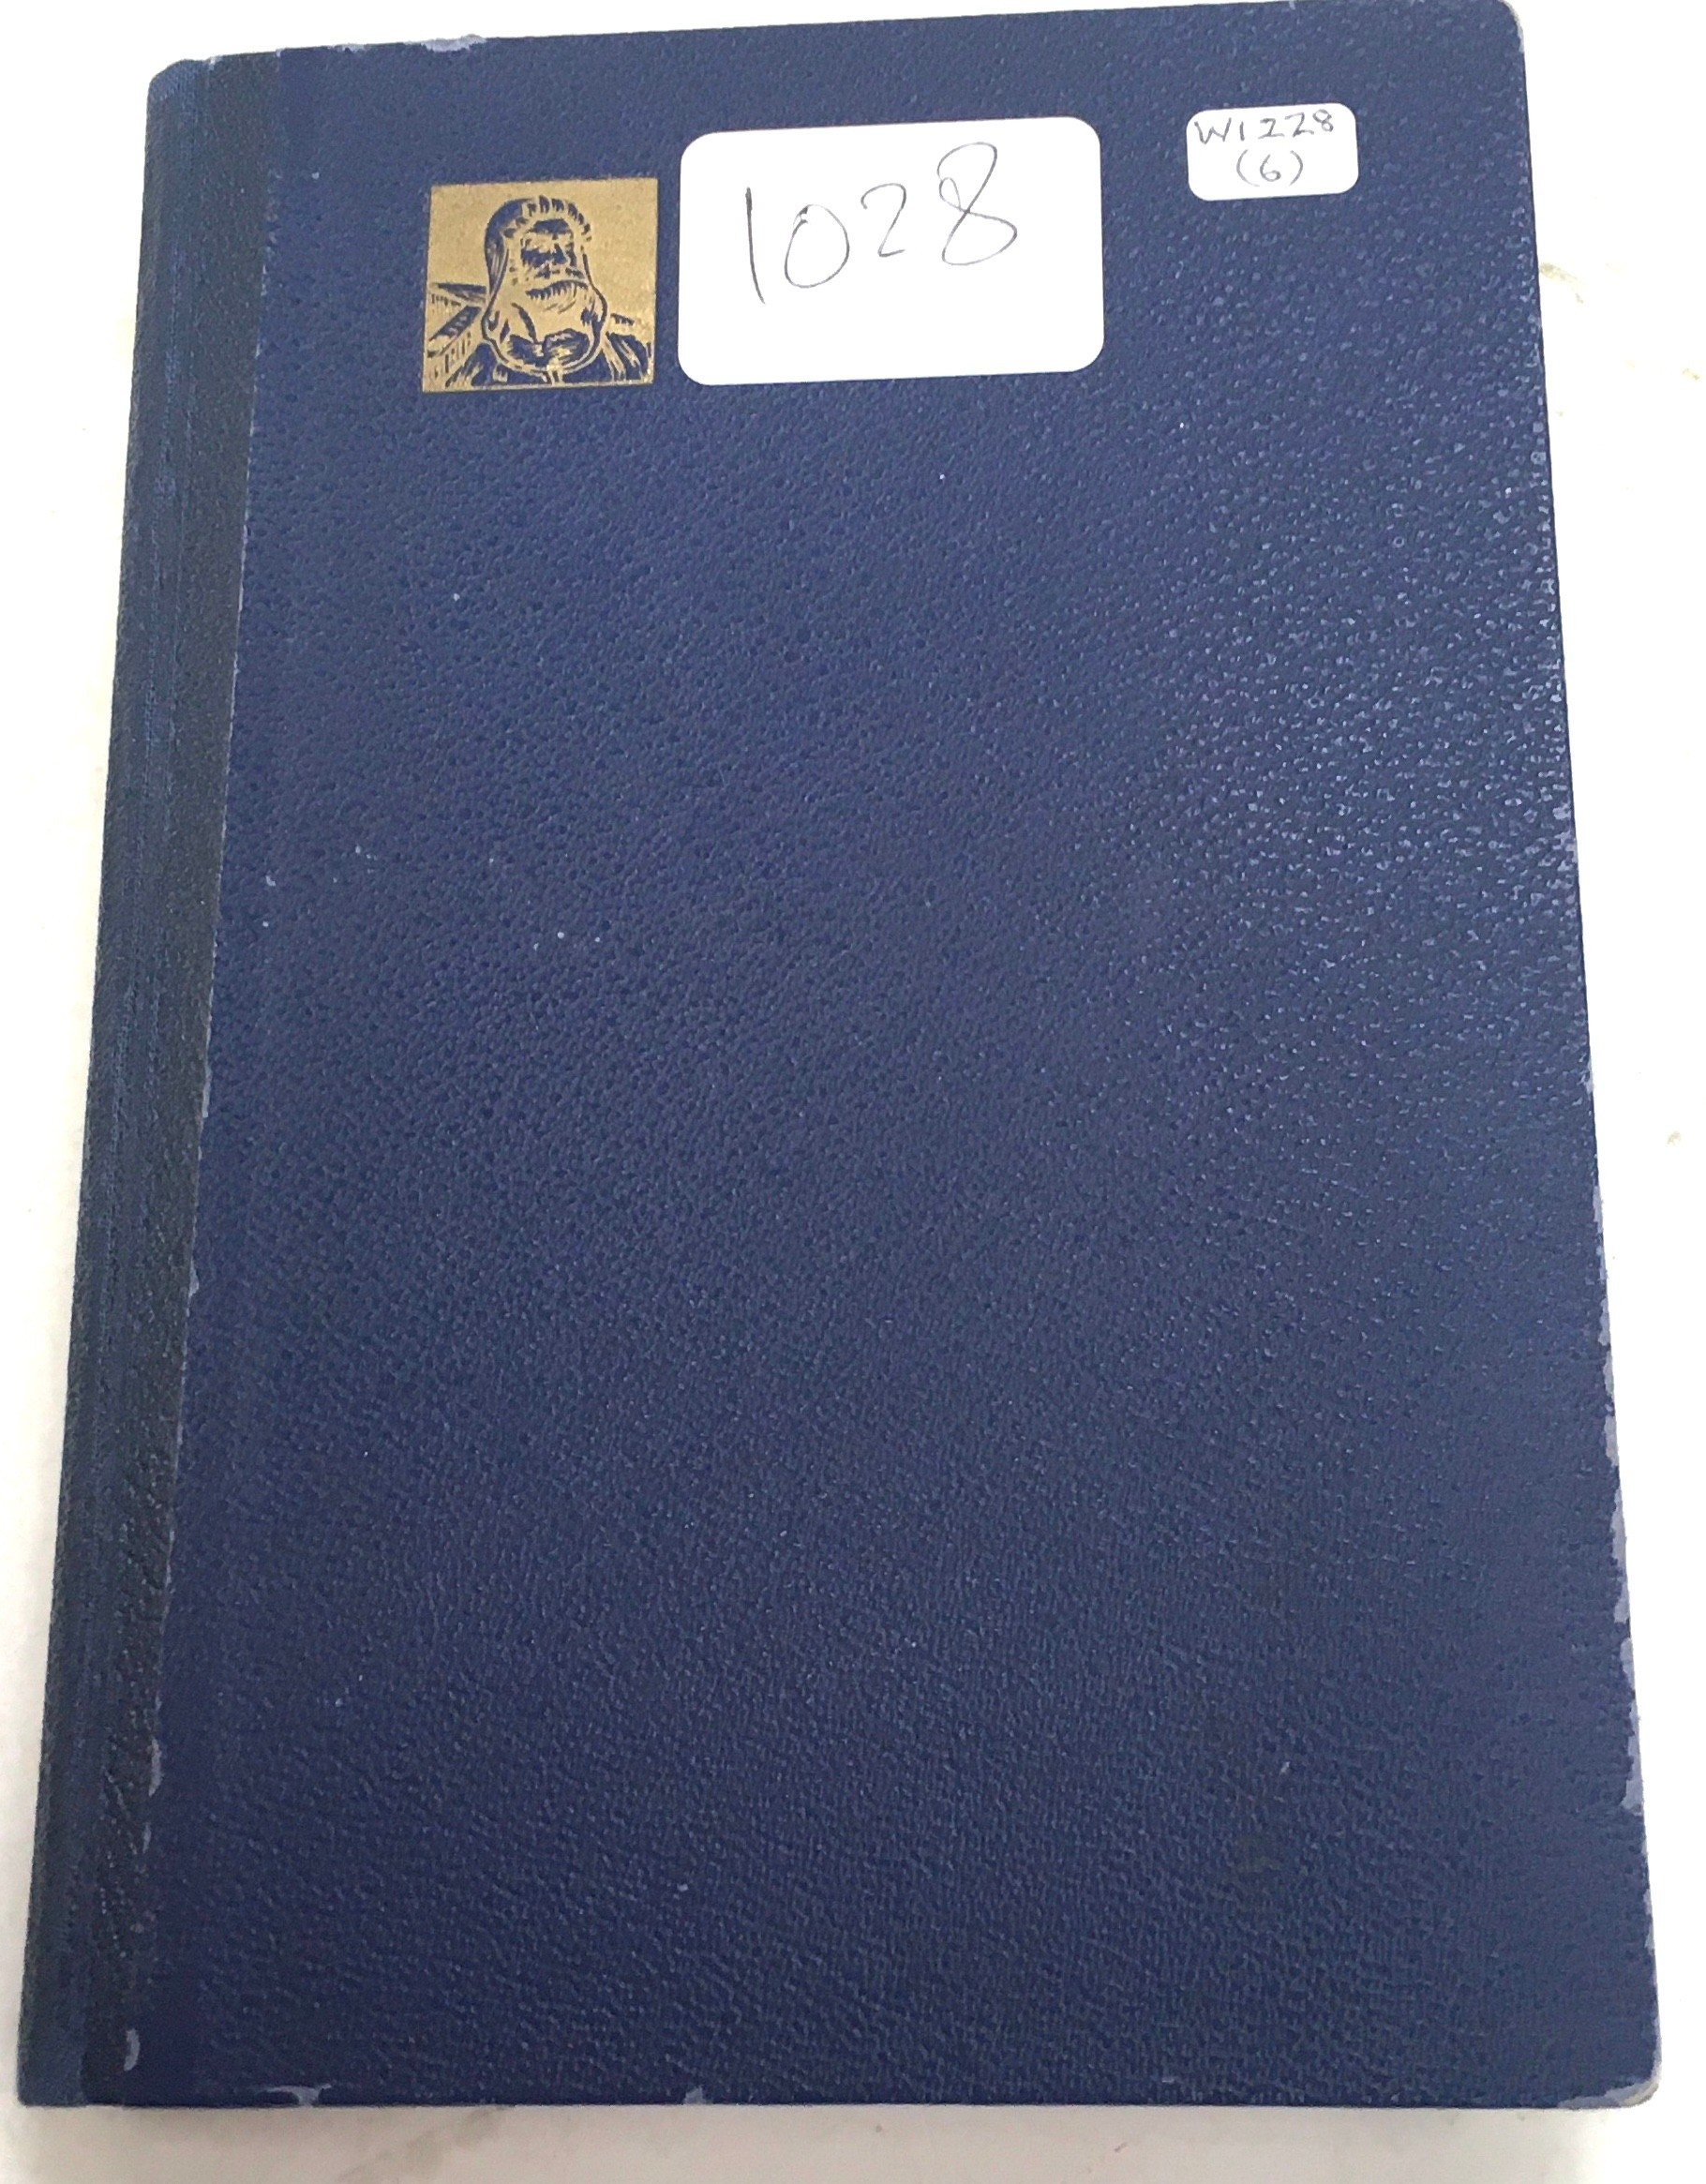 Greece incl. Crete small stockbook of mint/used Cat over £800 - Image 7 of 7